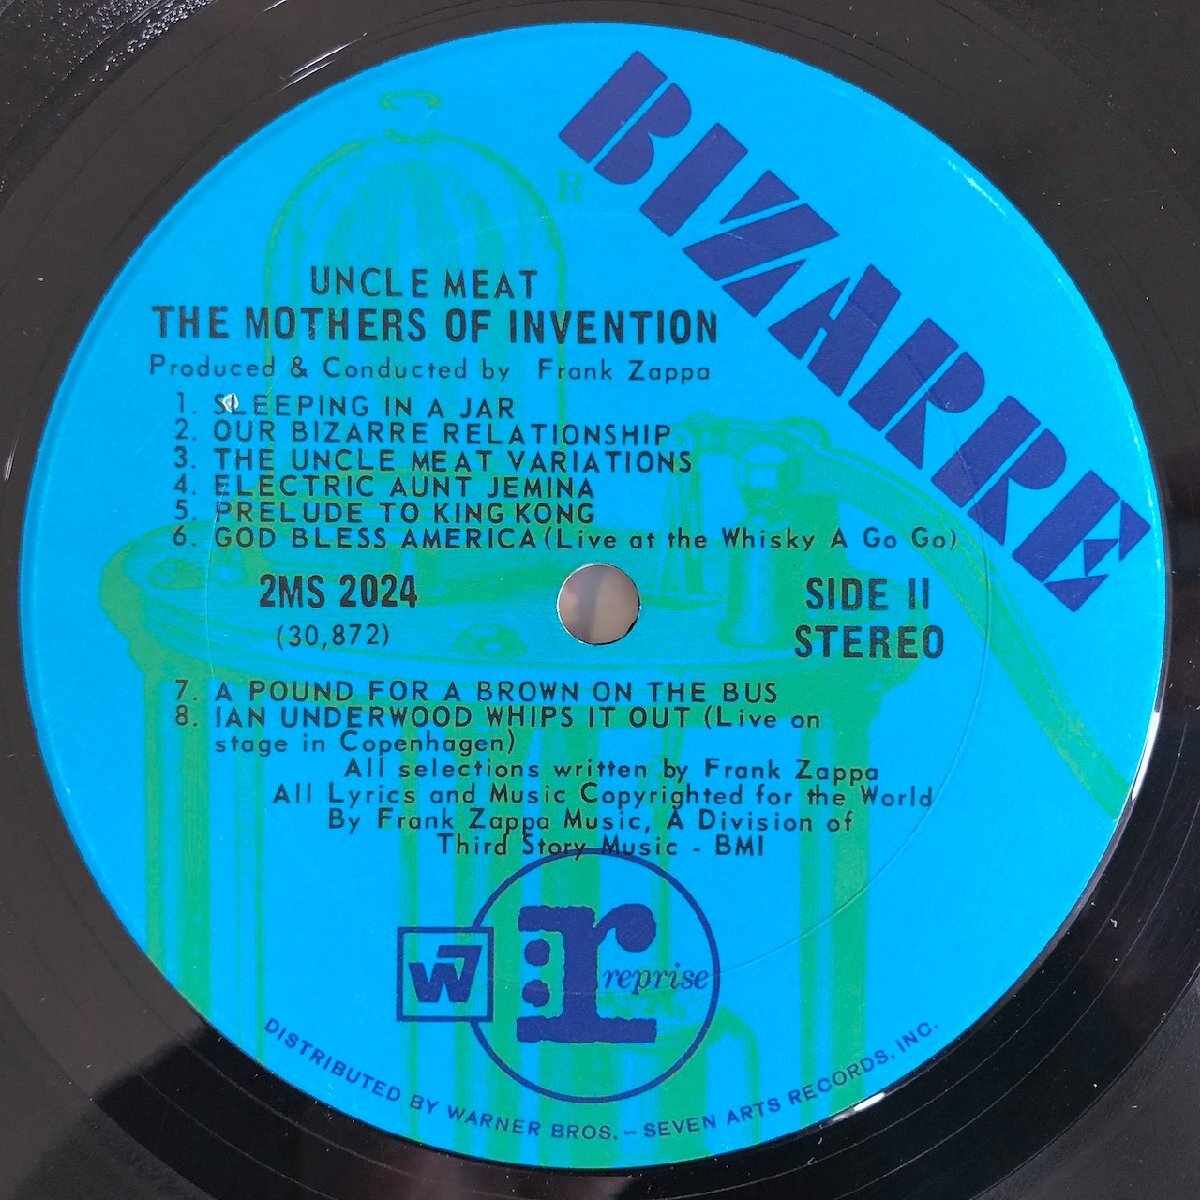 LP/ FRANK ZAPPA THE MOTHERS OF INVENTION / UNCLE MEAT / フランク・ザッパ / US盤 オリジナル 青ラベル 2枚組 BIZARRE 2MS2024 40326の画像6